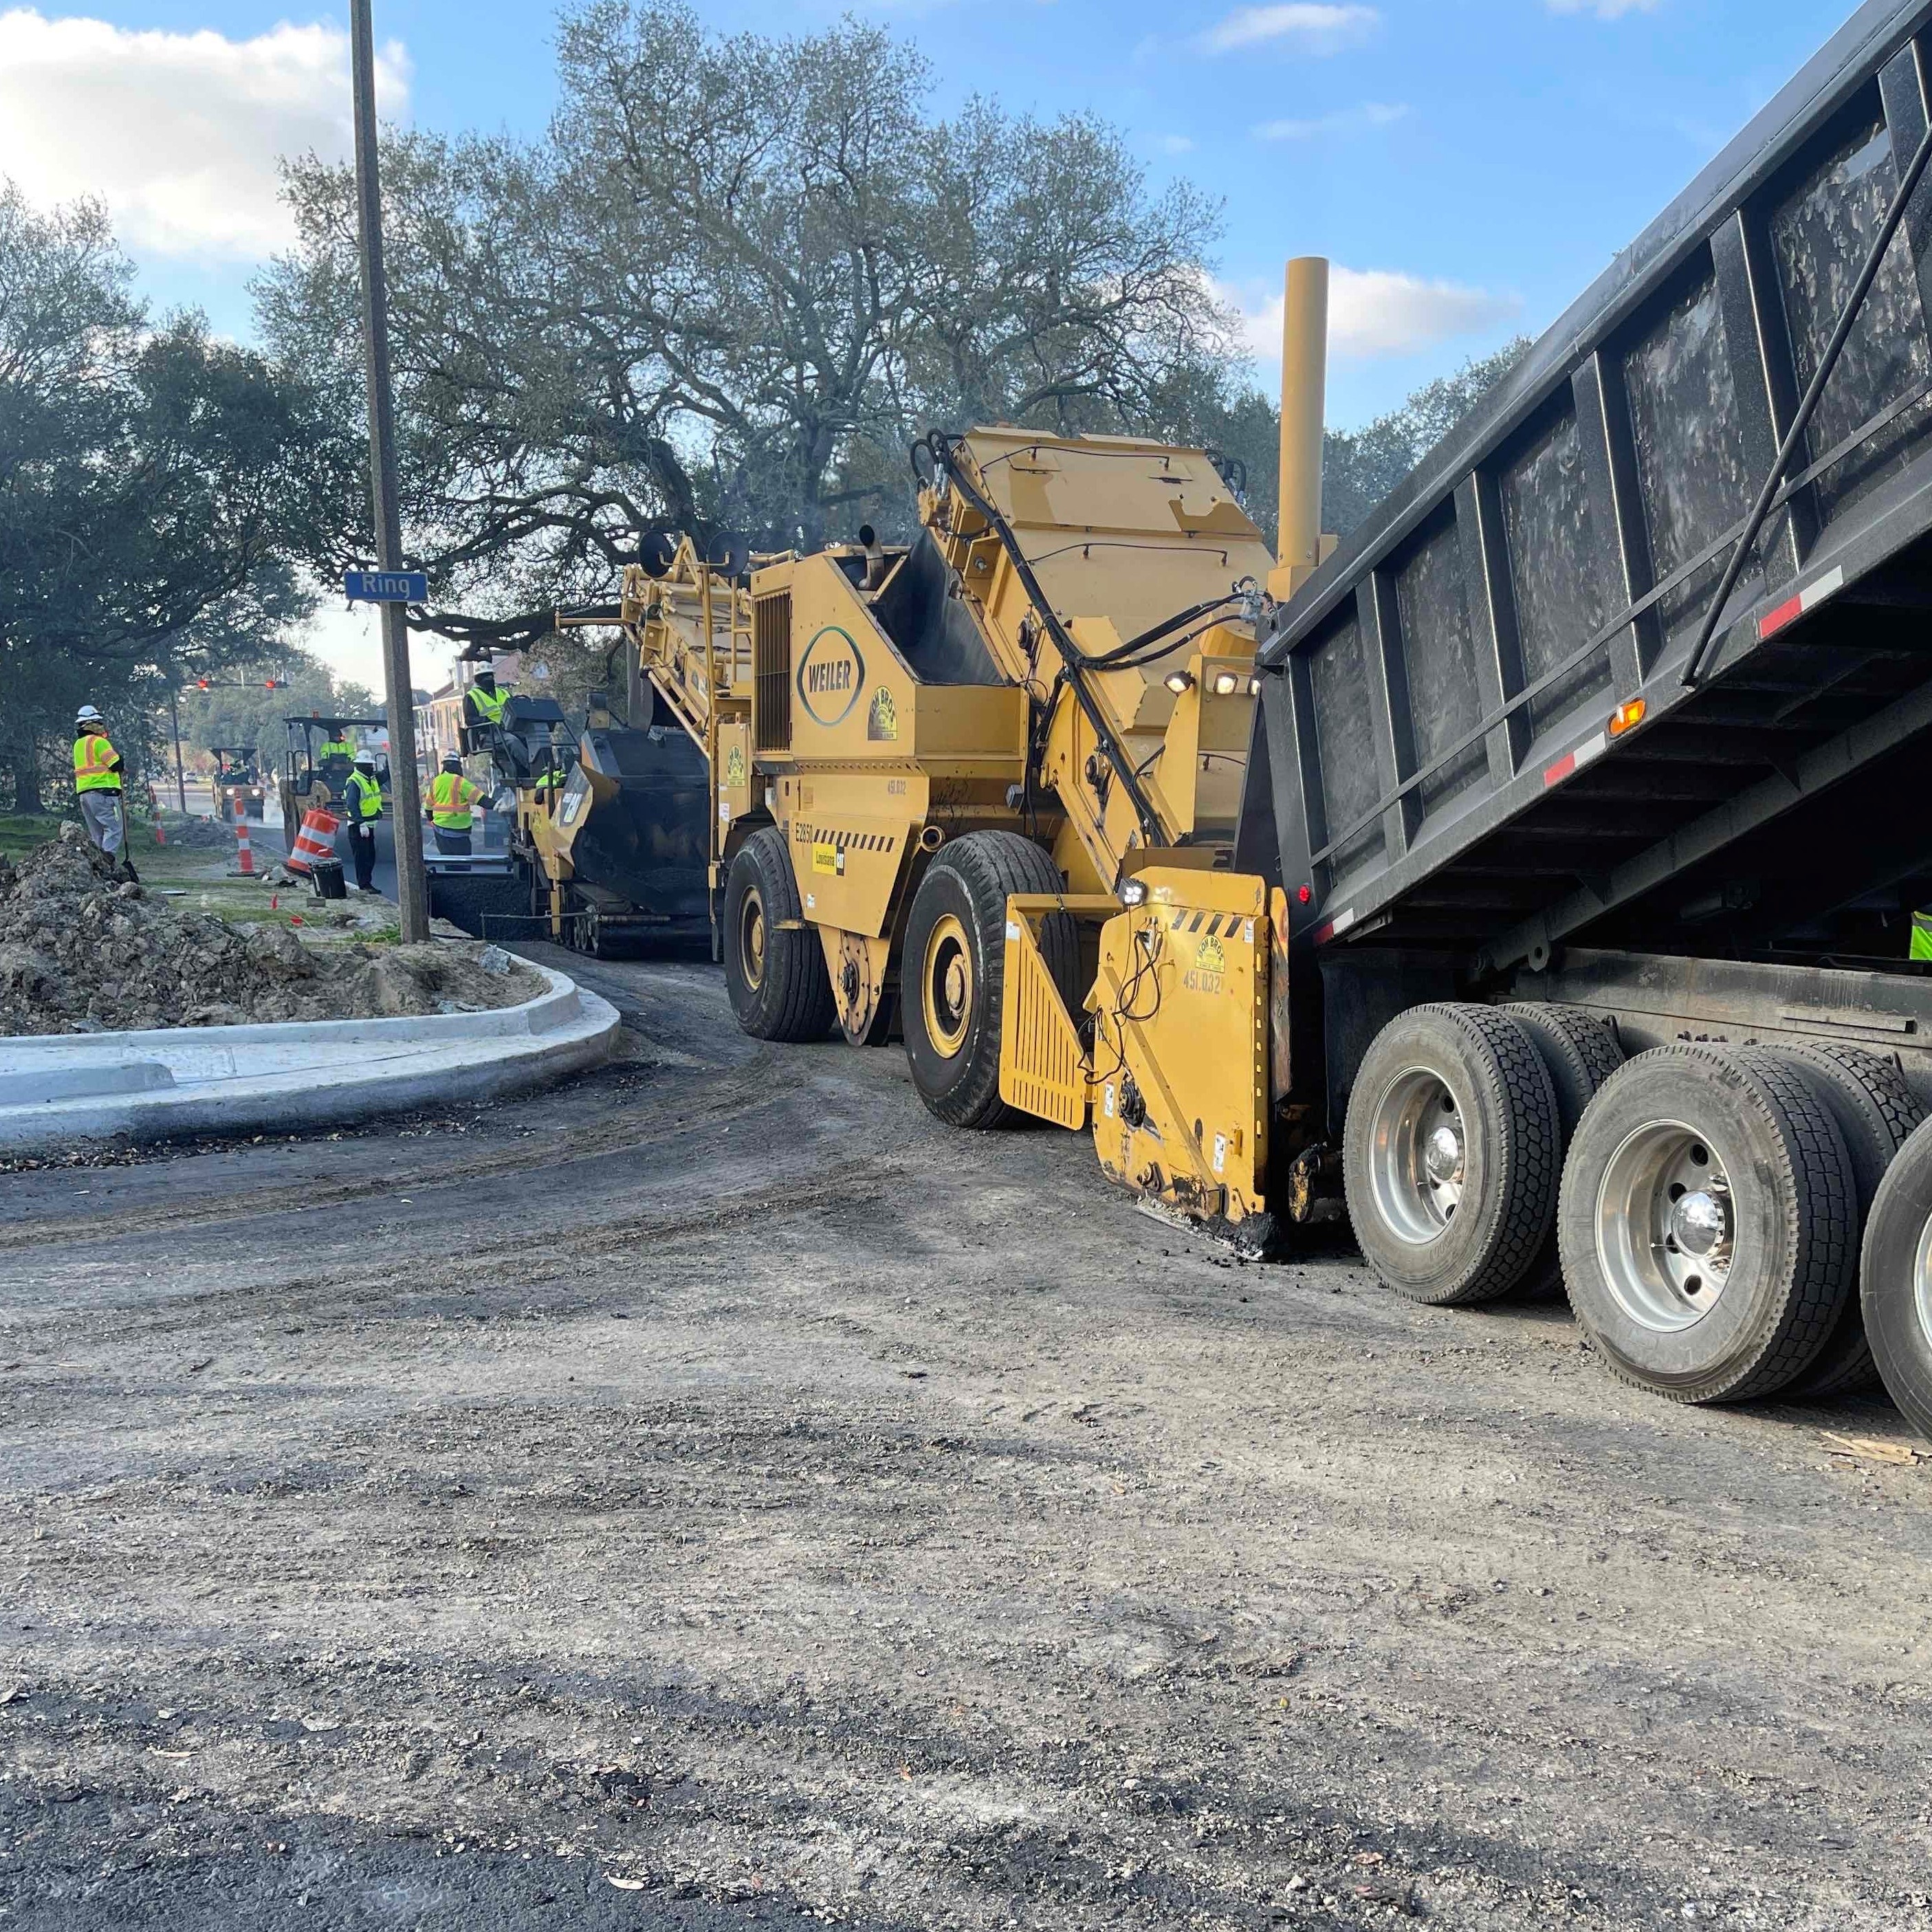 PAVEMENT RESTORATION CONTINUES ON CANAL BOULEVARD  